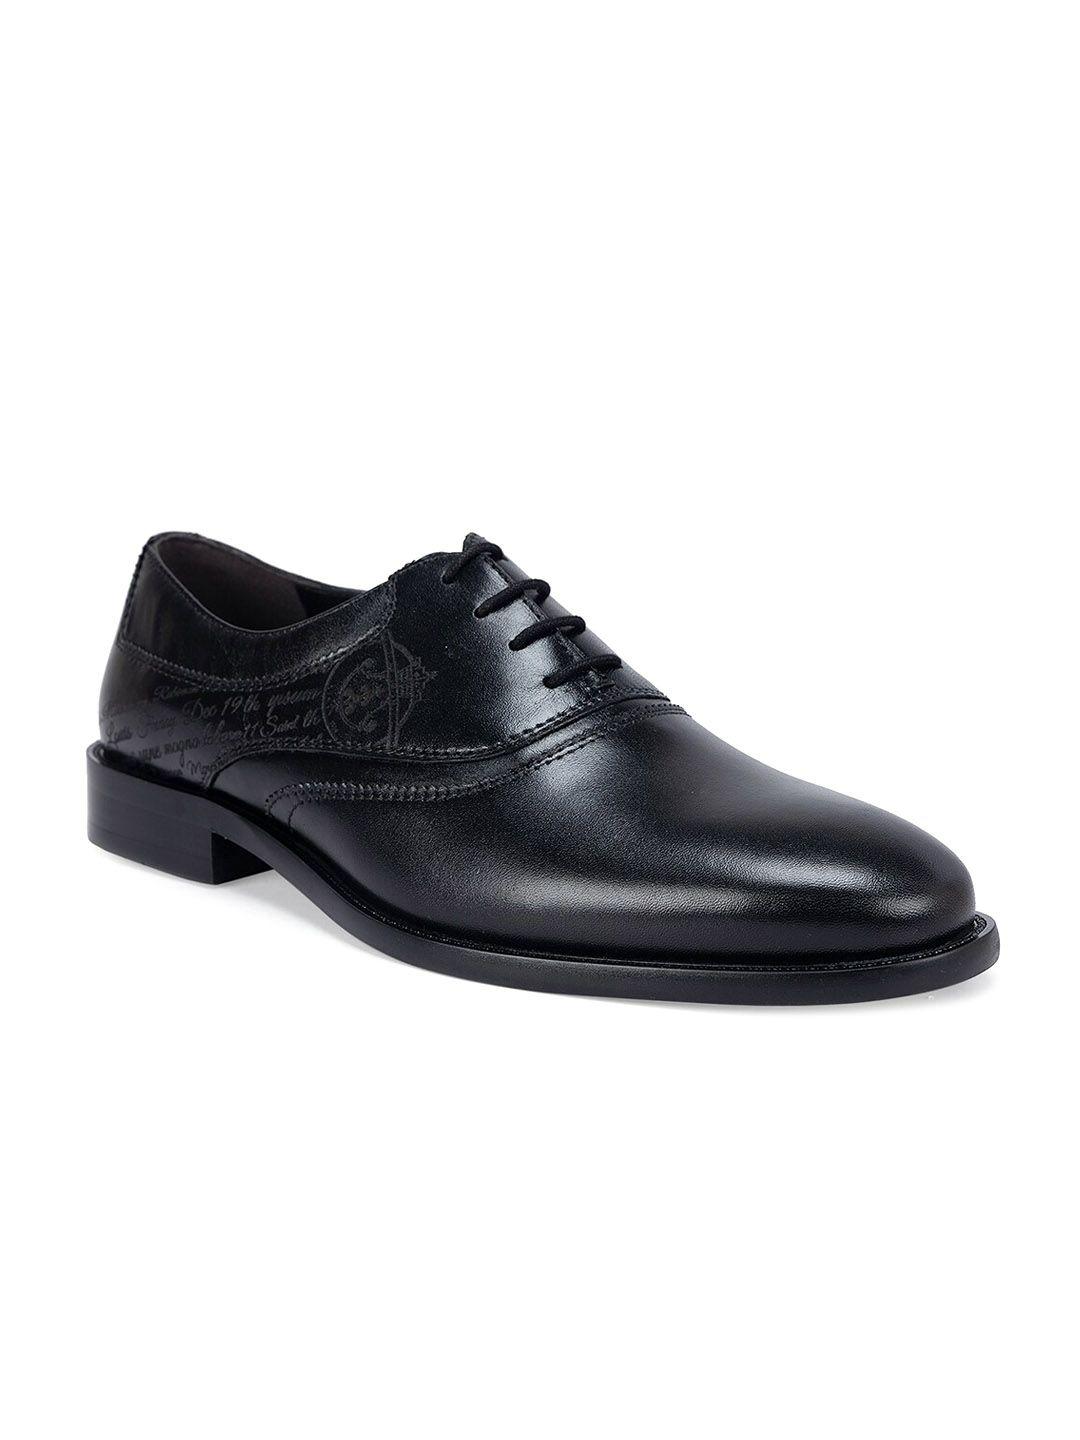 ROSSO BRUNELLO Men Textured Leather Formal Oxfords